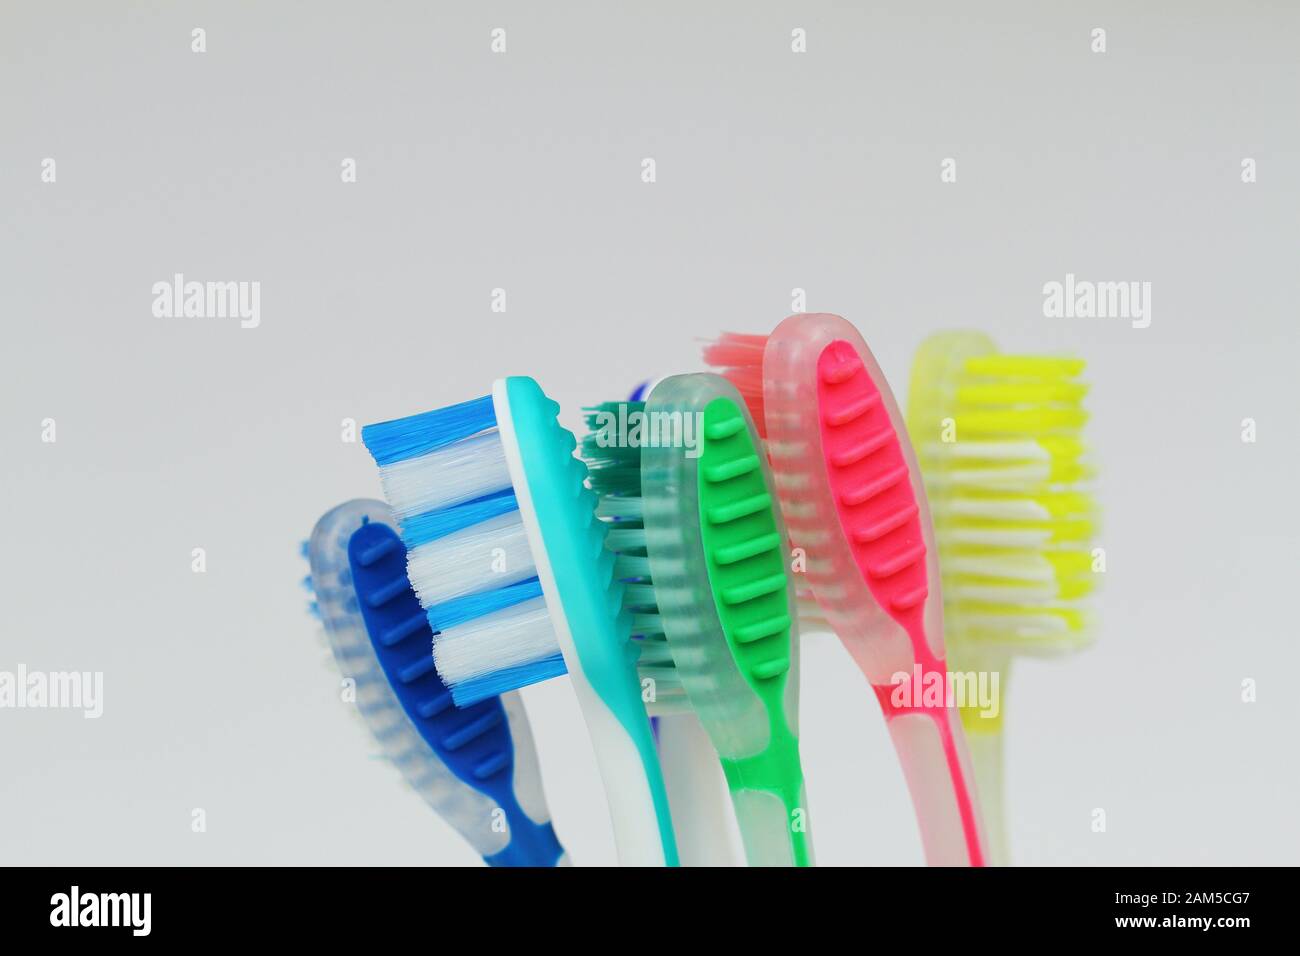 Closeup of few colorful toothbrushes on white background Stock Photo